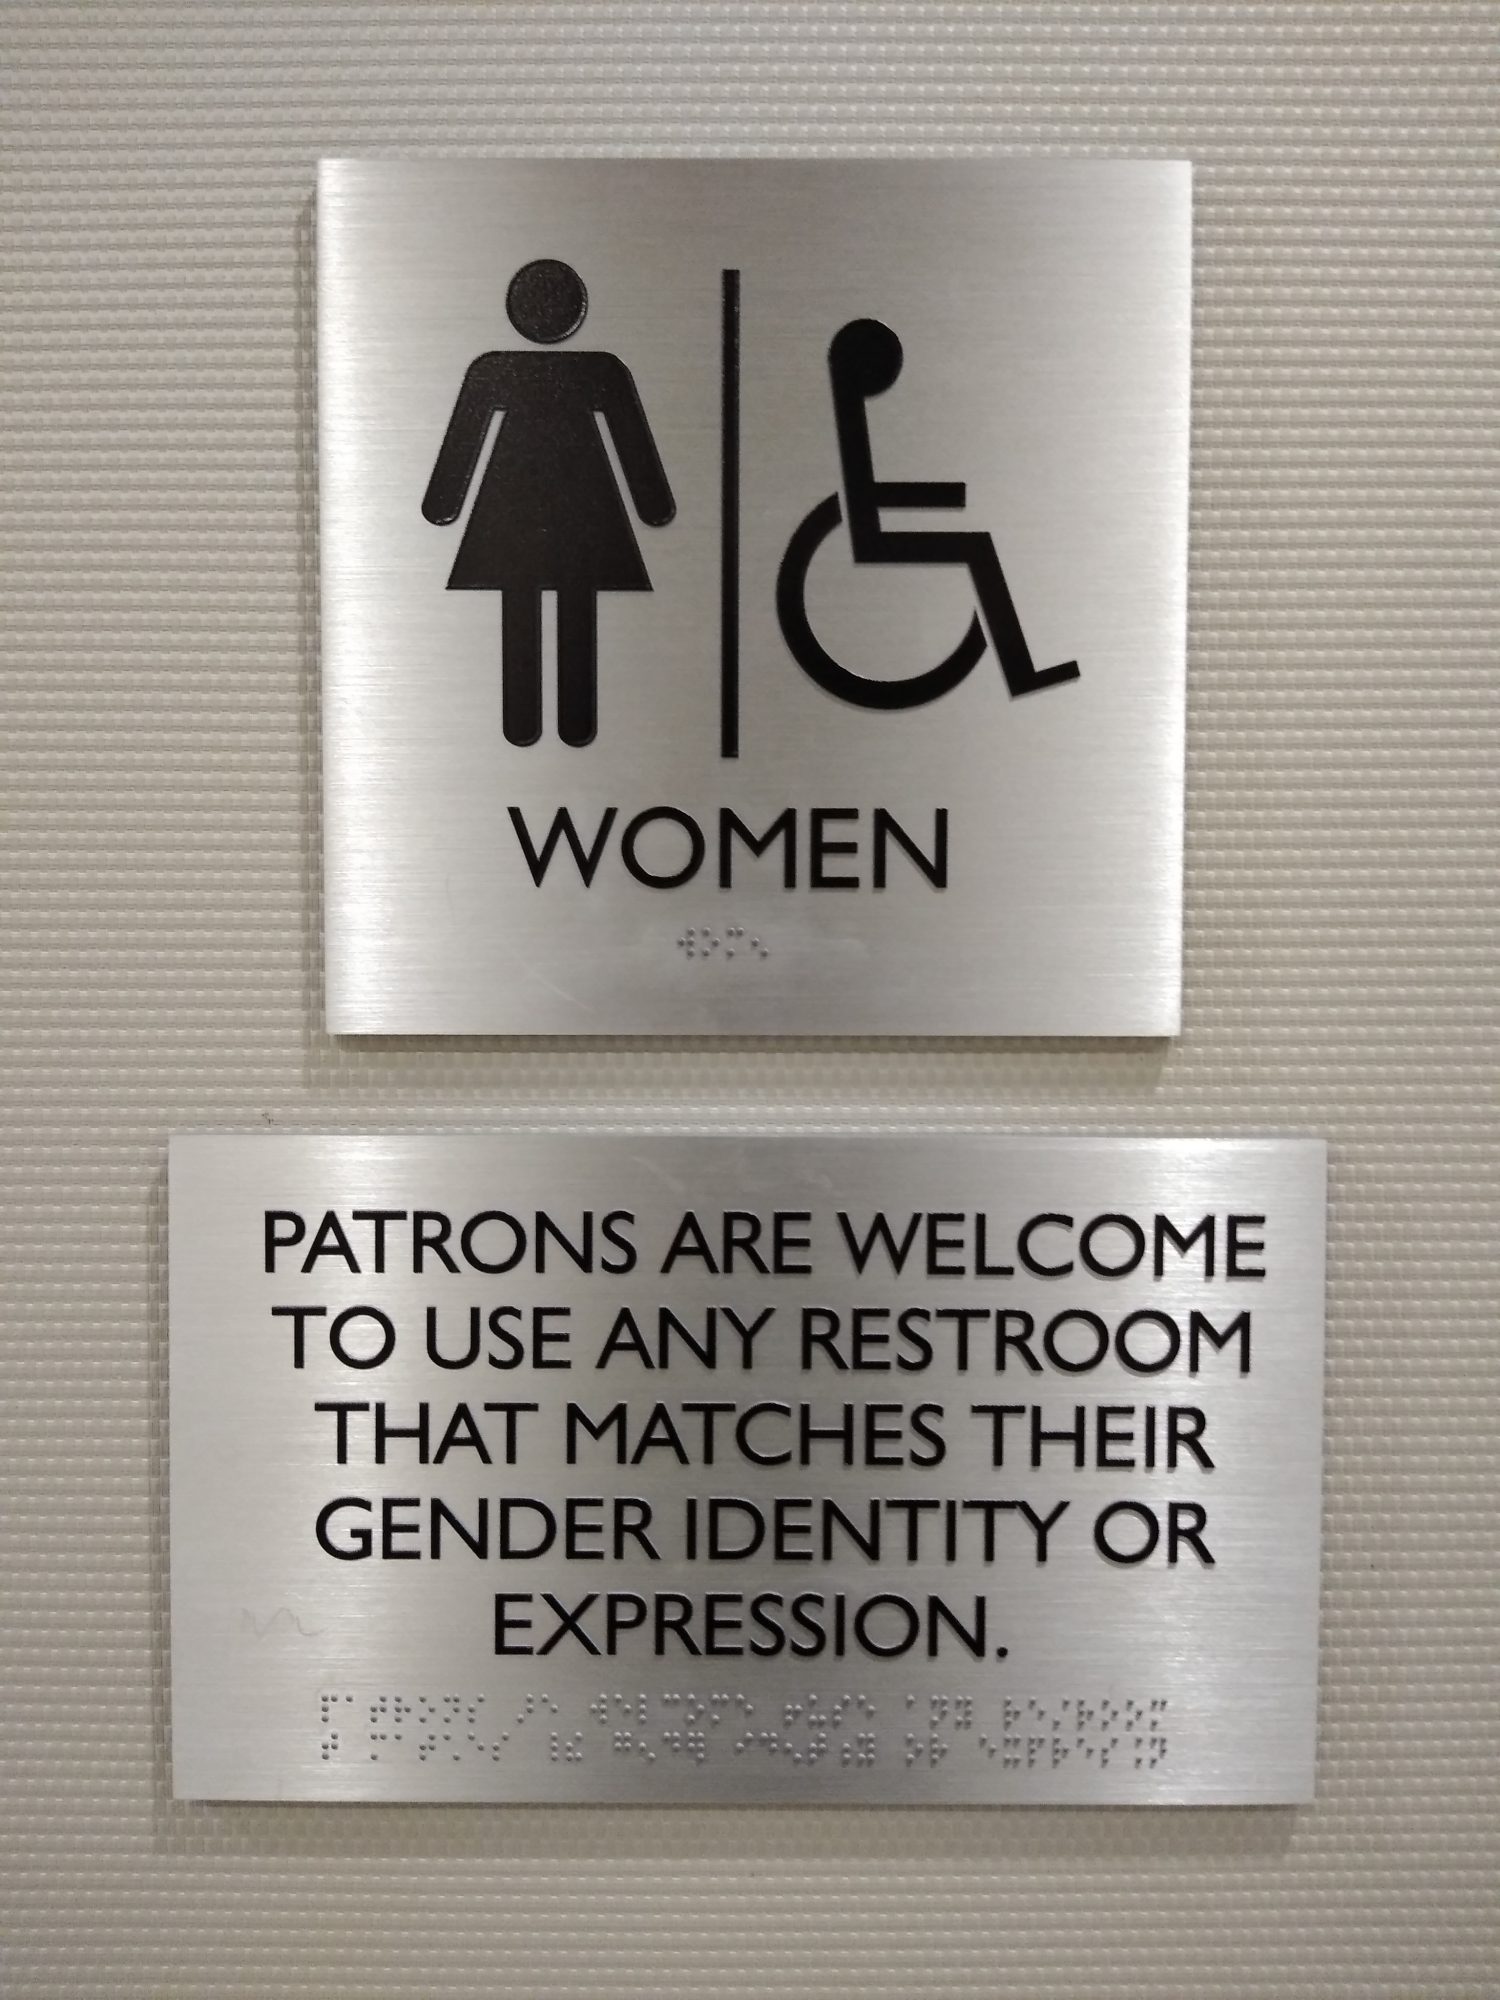 Although this bathroom sign is labeled for WOMEN, this establishment clarifies that patrons are welcome to use any restroom matching their gender identity or expression. This photo was taken in New York City on August 28th 2019.